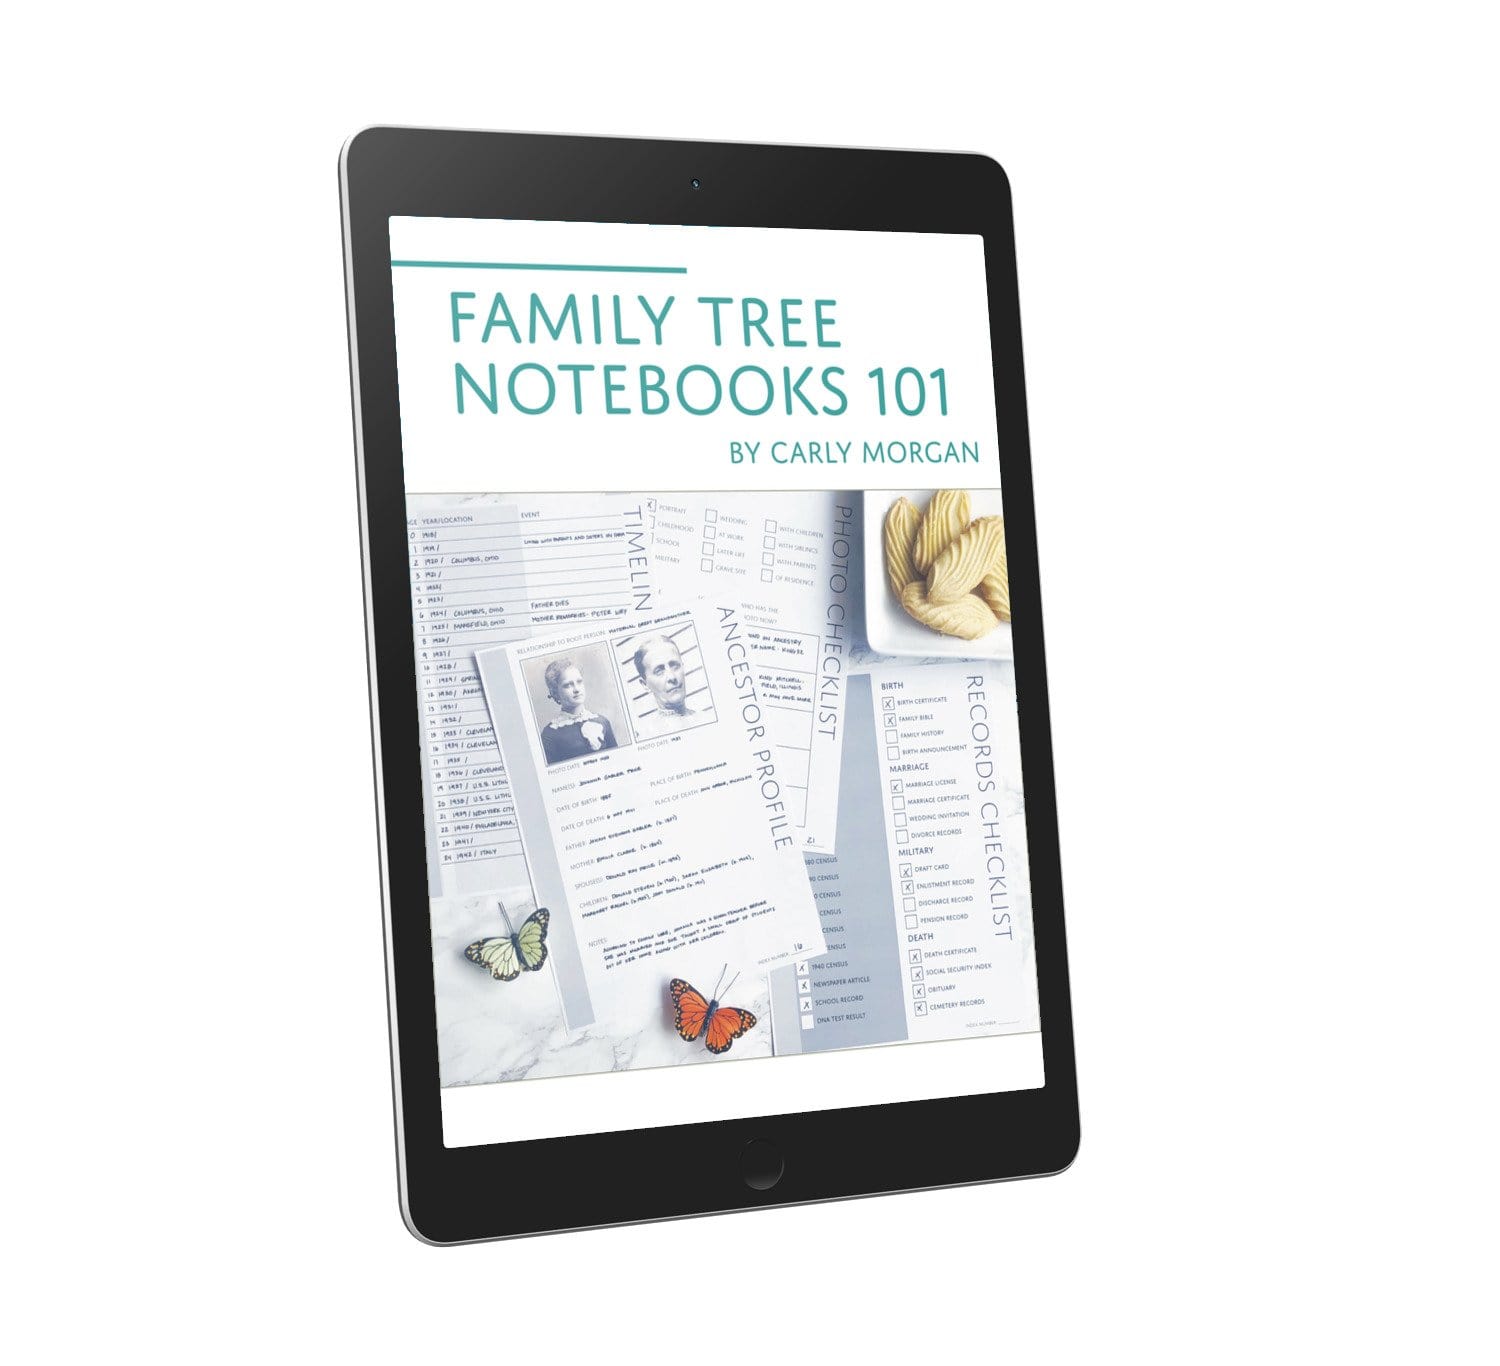 Our Family Tree Notebook: A hardcover genealogy notebook with lined pages  (Hardcover)